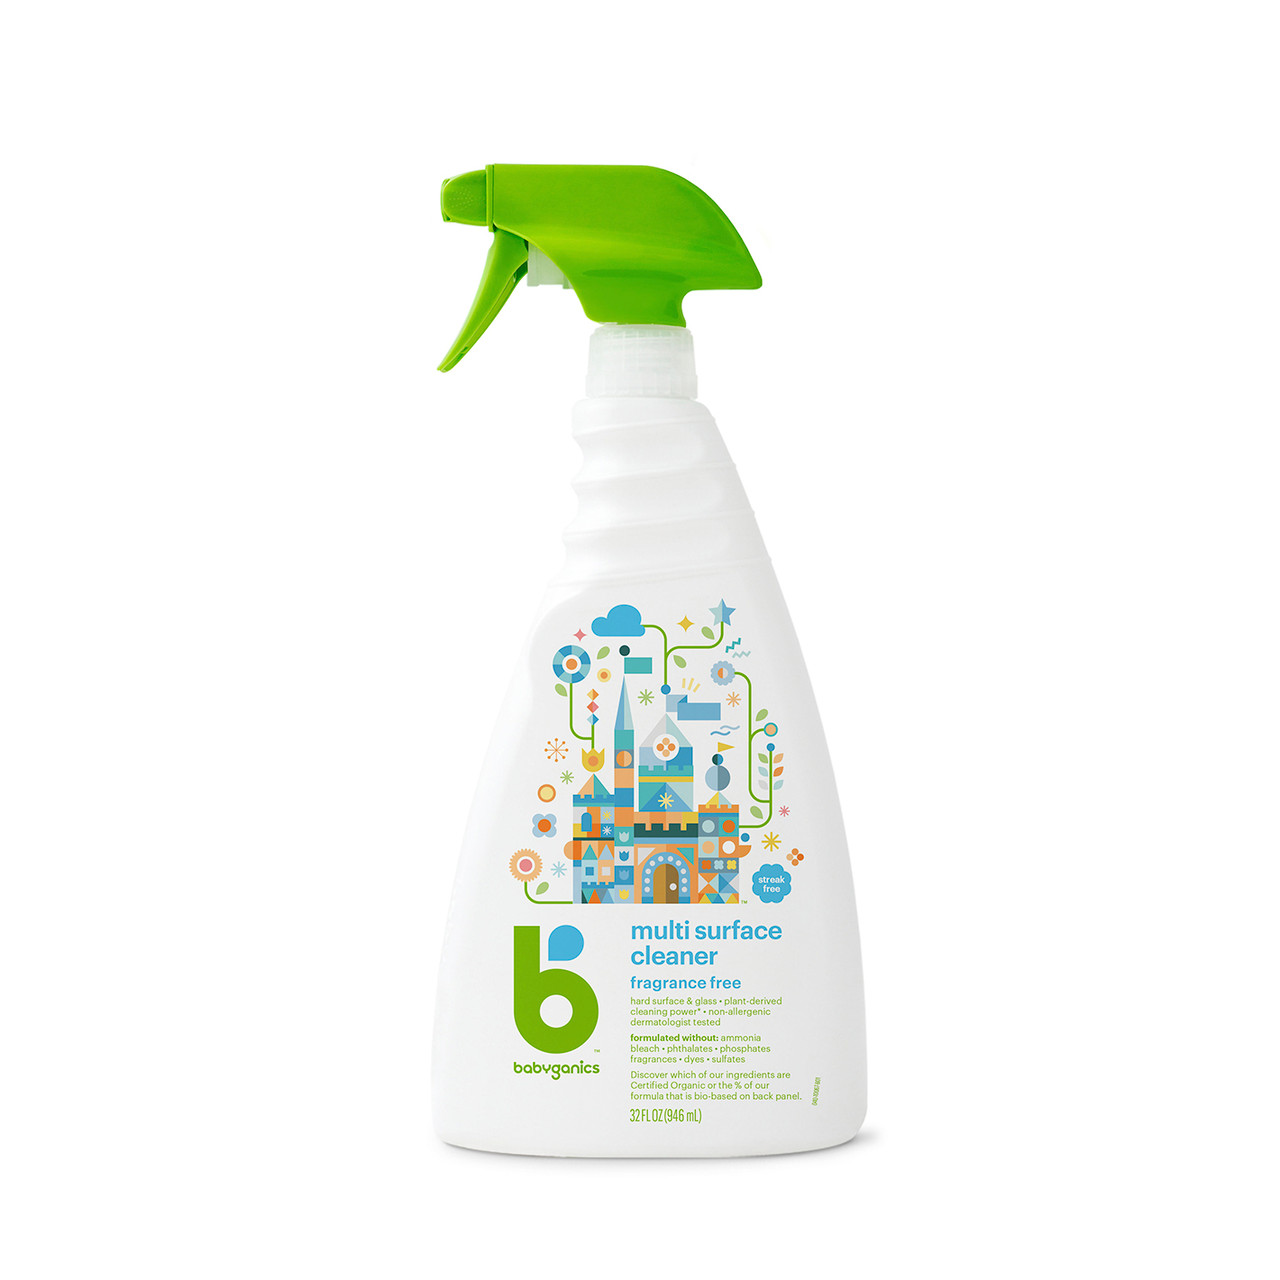 multi surface cleaner, fragrance free